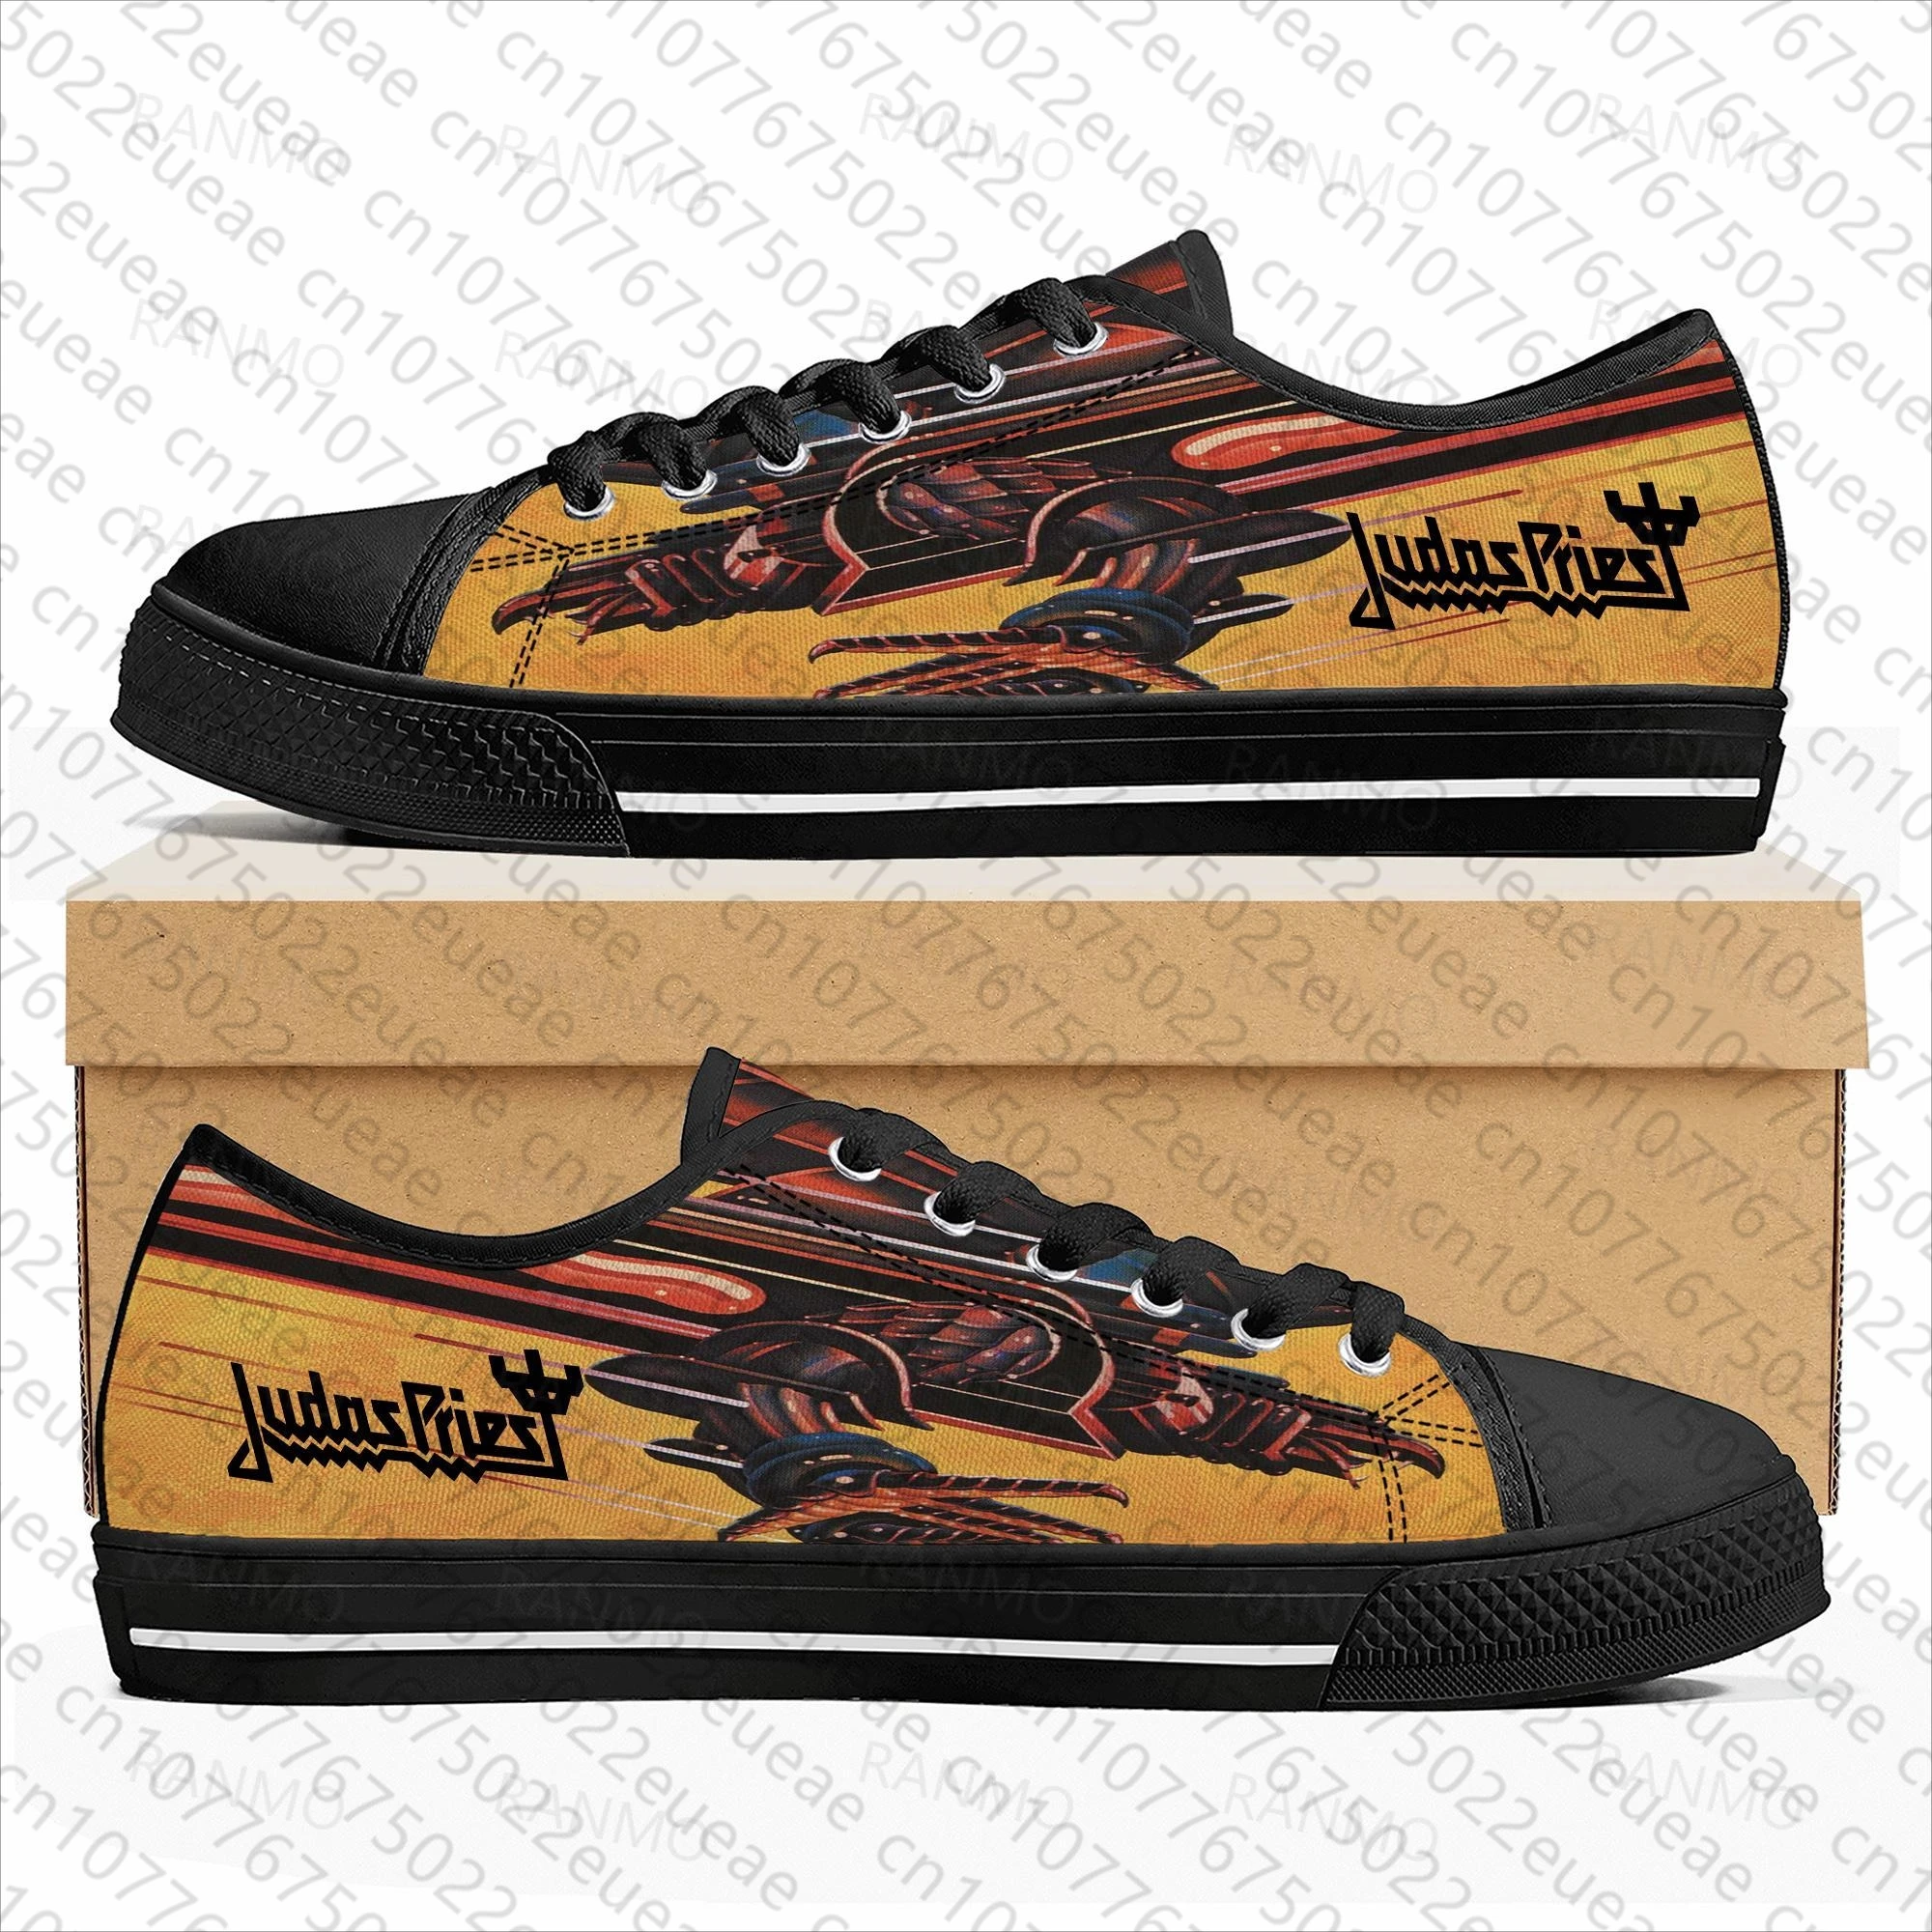 

Judas Priest Heavy Metal Rock Band Low Top High Quality Sneakers Mens Women Teenager Canvas Sneaker Casual Custom Couple Shoes